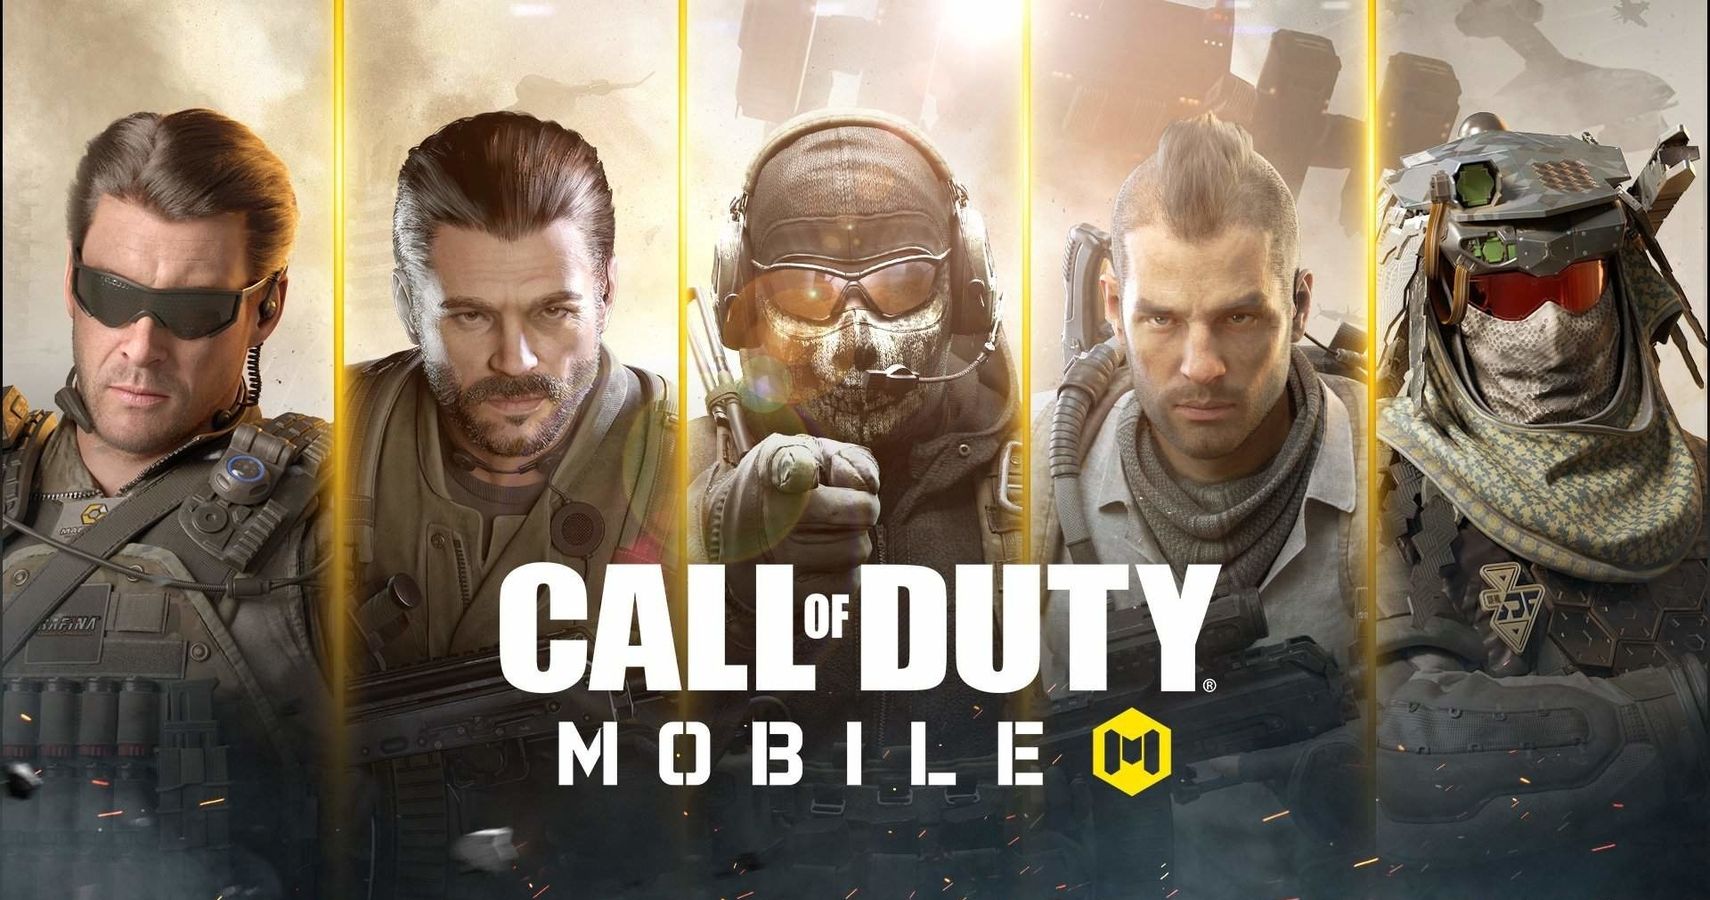 Call of Duty mobile main character